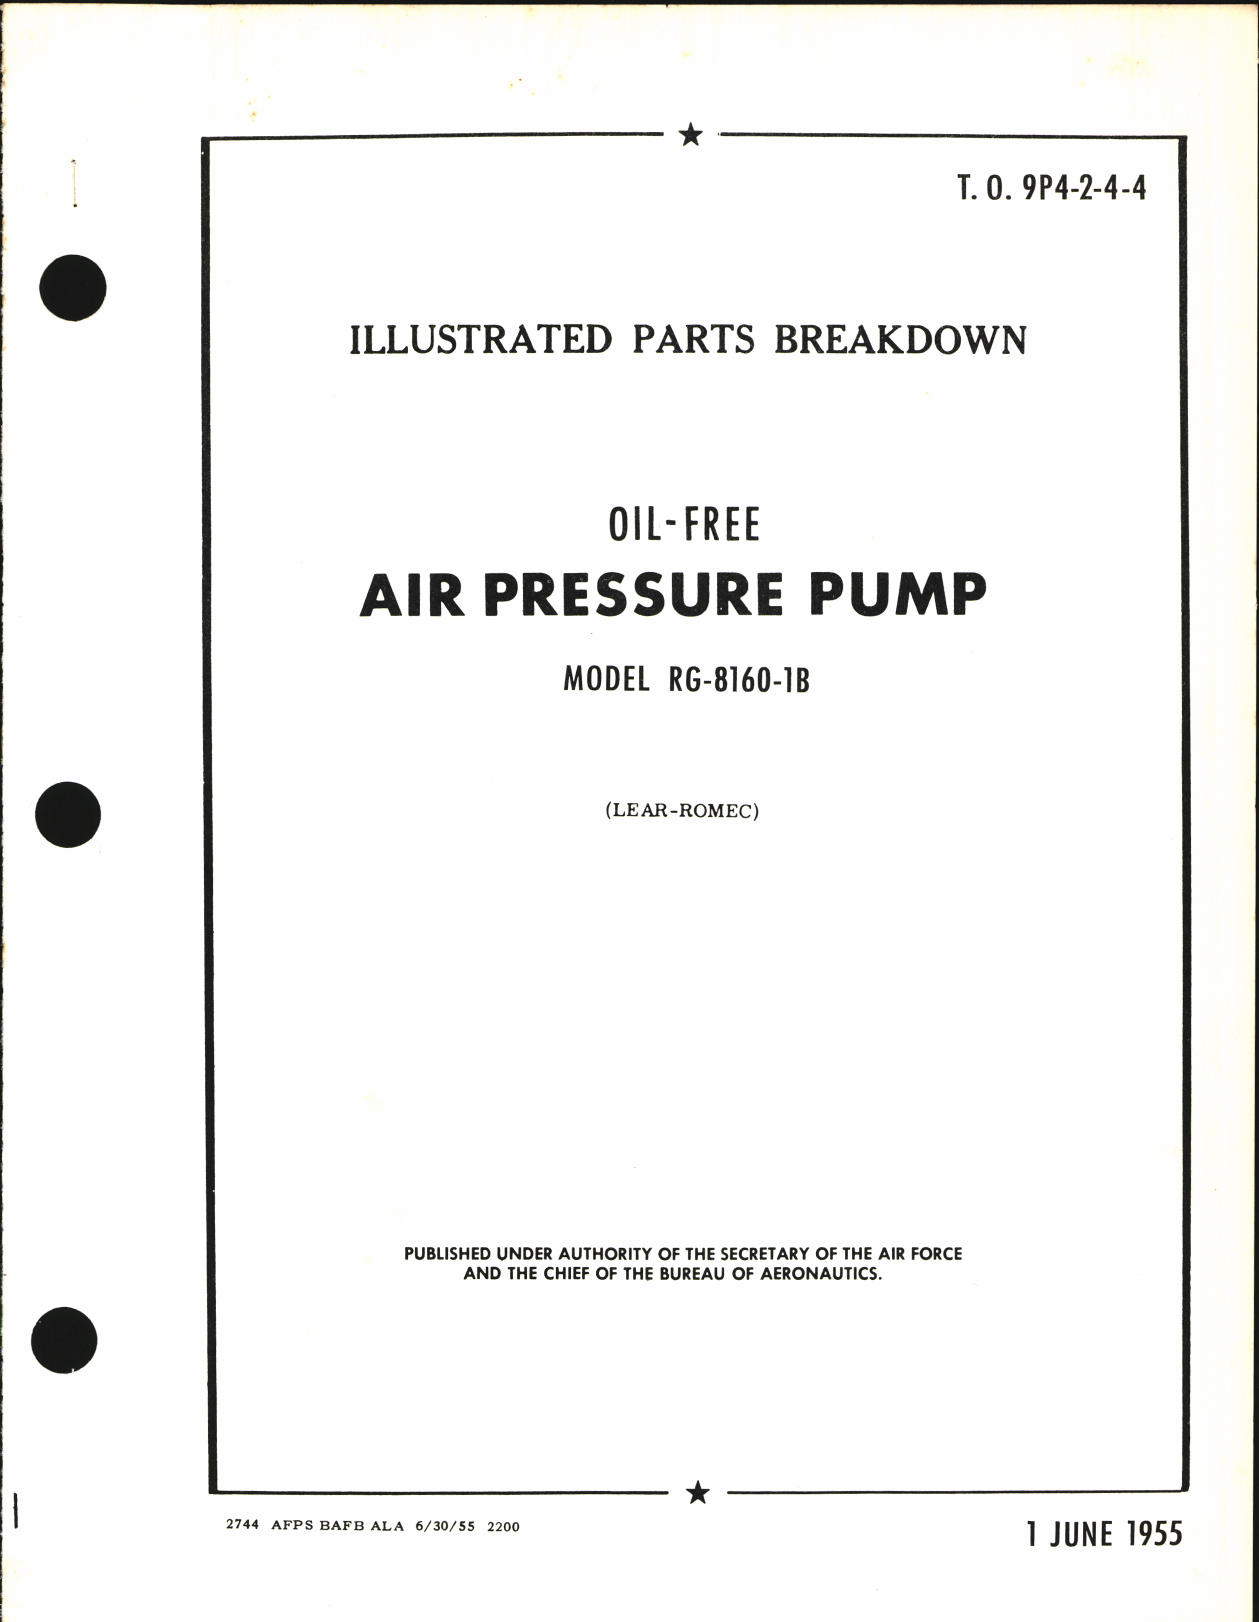 Sample page 1 from AirCorps Library document: Illustrated Parts Breakdown for Oil-Free Air Pressure Pump Model RG-8160-1B